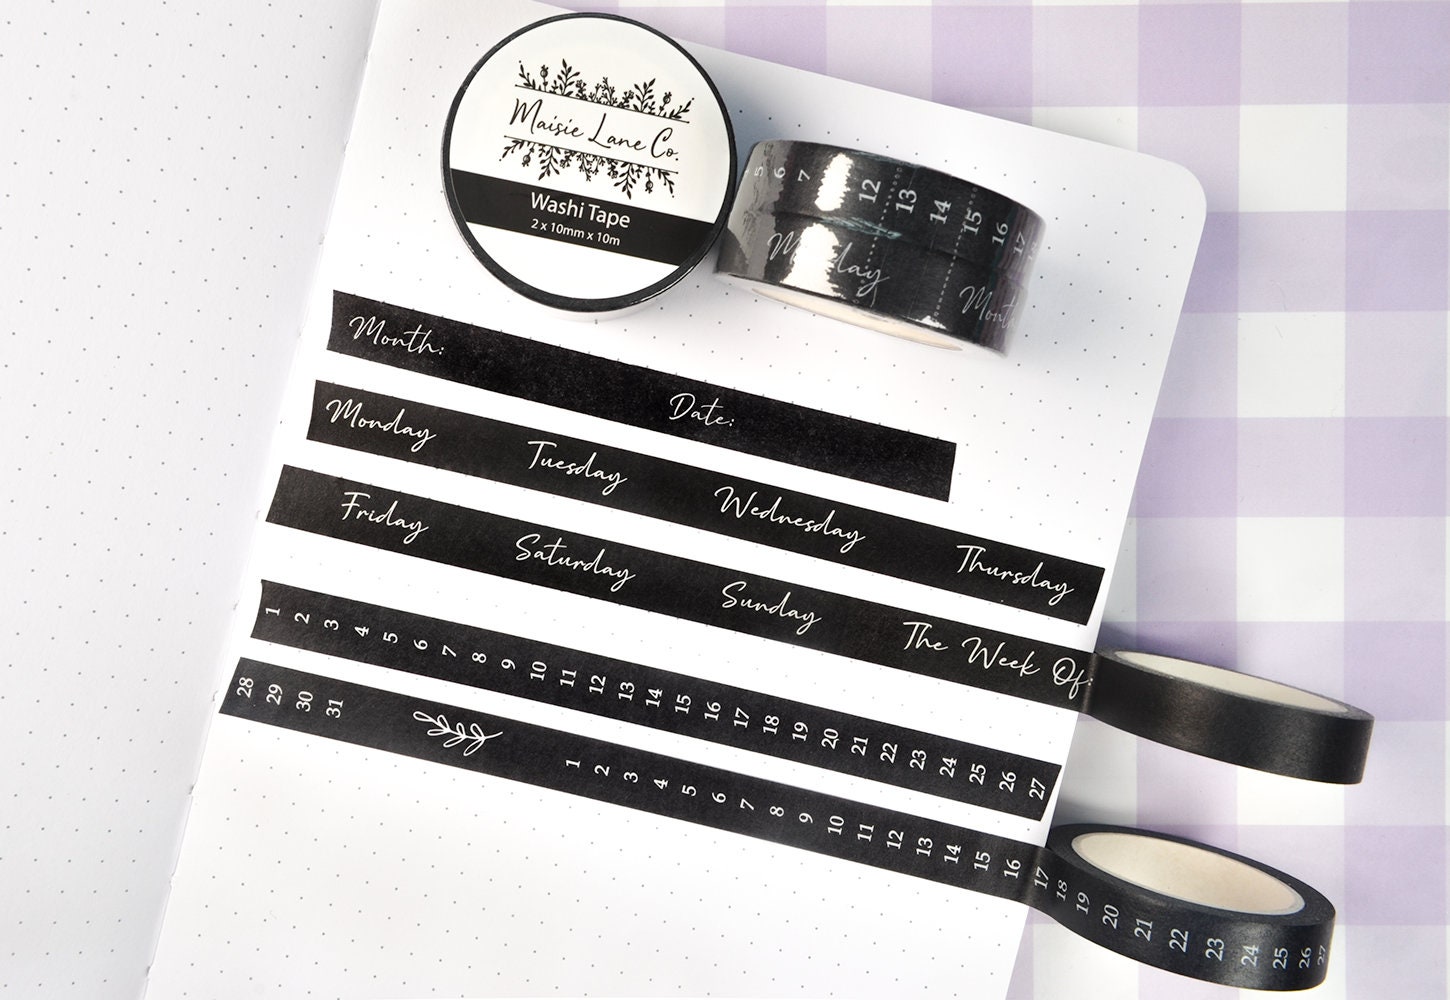 Horizontal Numbers Skinny Washi Tape Numbers/monthly/planning Washi Tape 